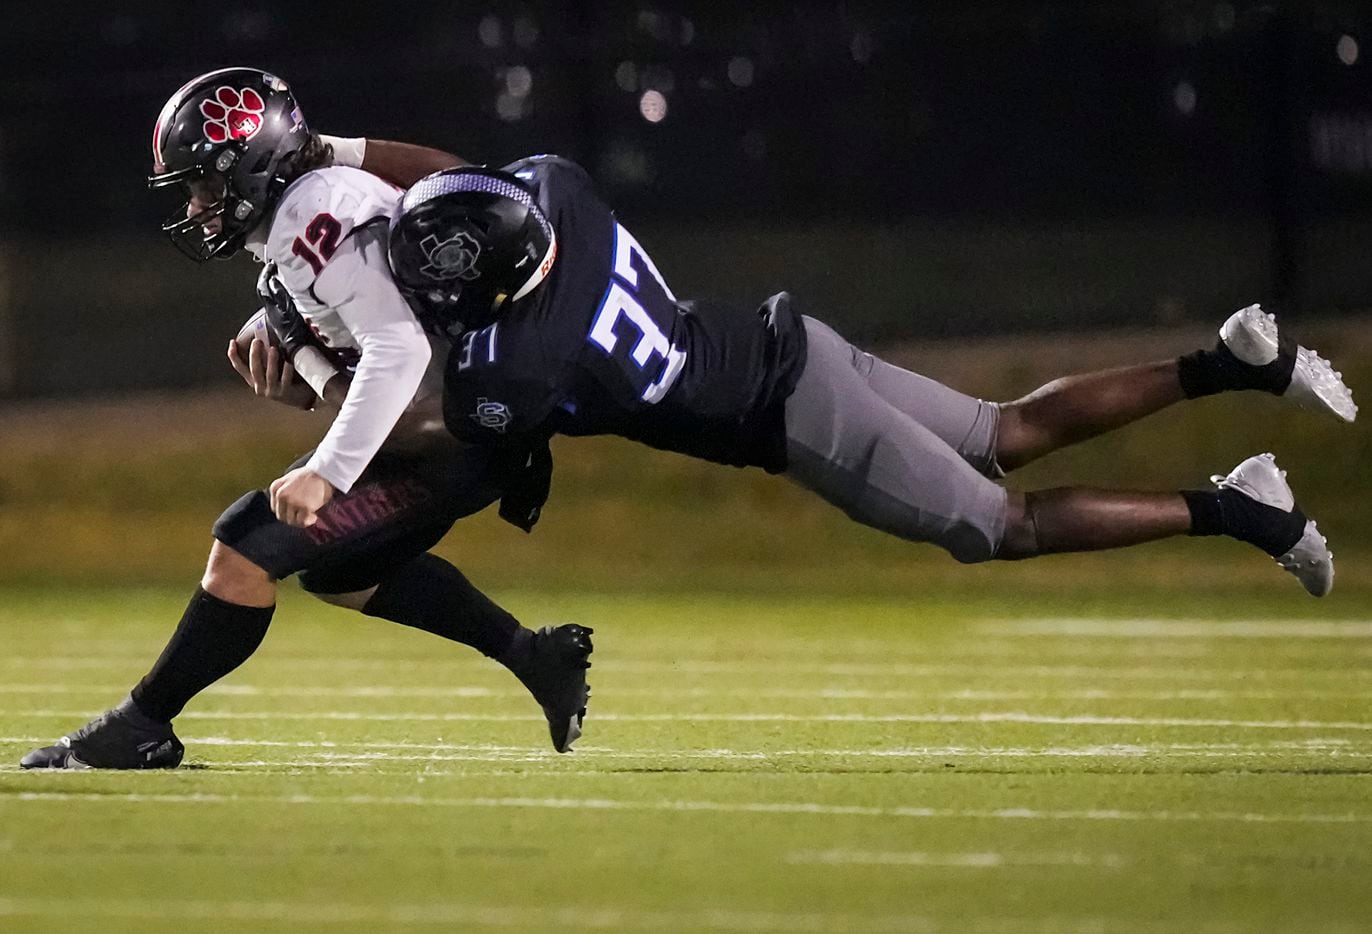 Colleyville Heritage quarterback Luke Ullrich (12) is brought down by Mansfield Summit linebacker Jaden Williams (37) during the second half of the Class 5A Division I Region I final on Friday, Dec. 3, 2021, in North Richland Hills, Texas. (Smiley N. Pool/The Dallas Morning News)